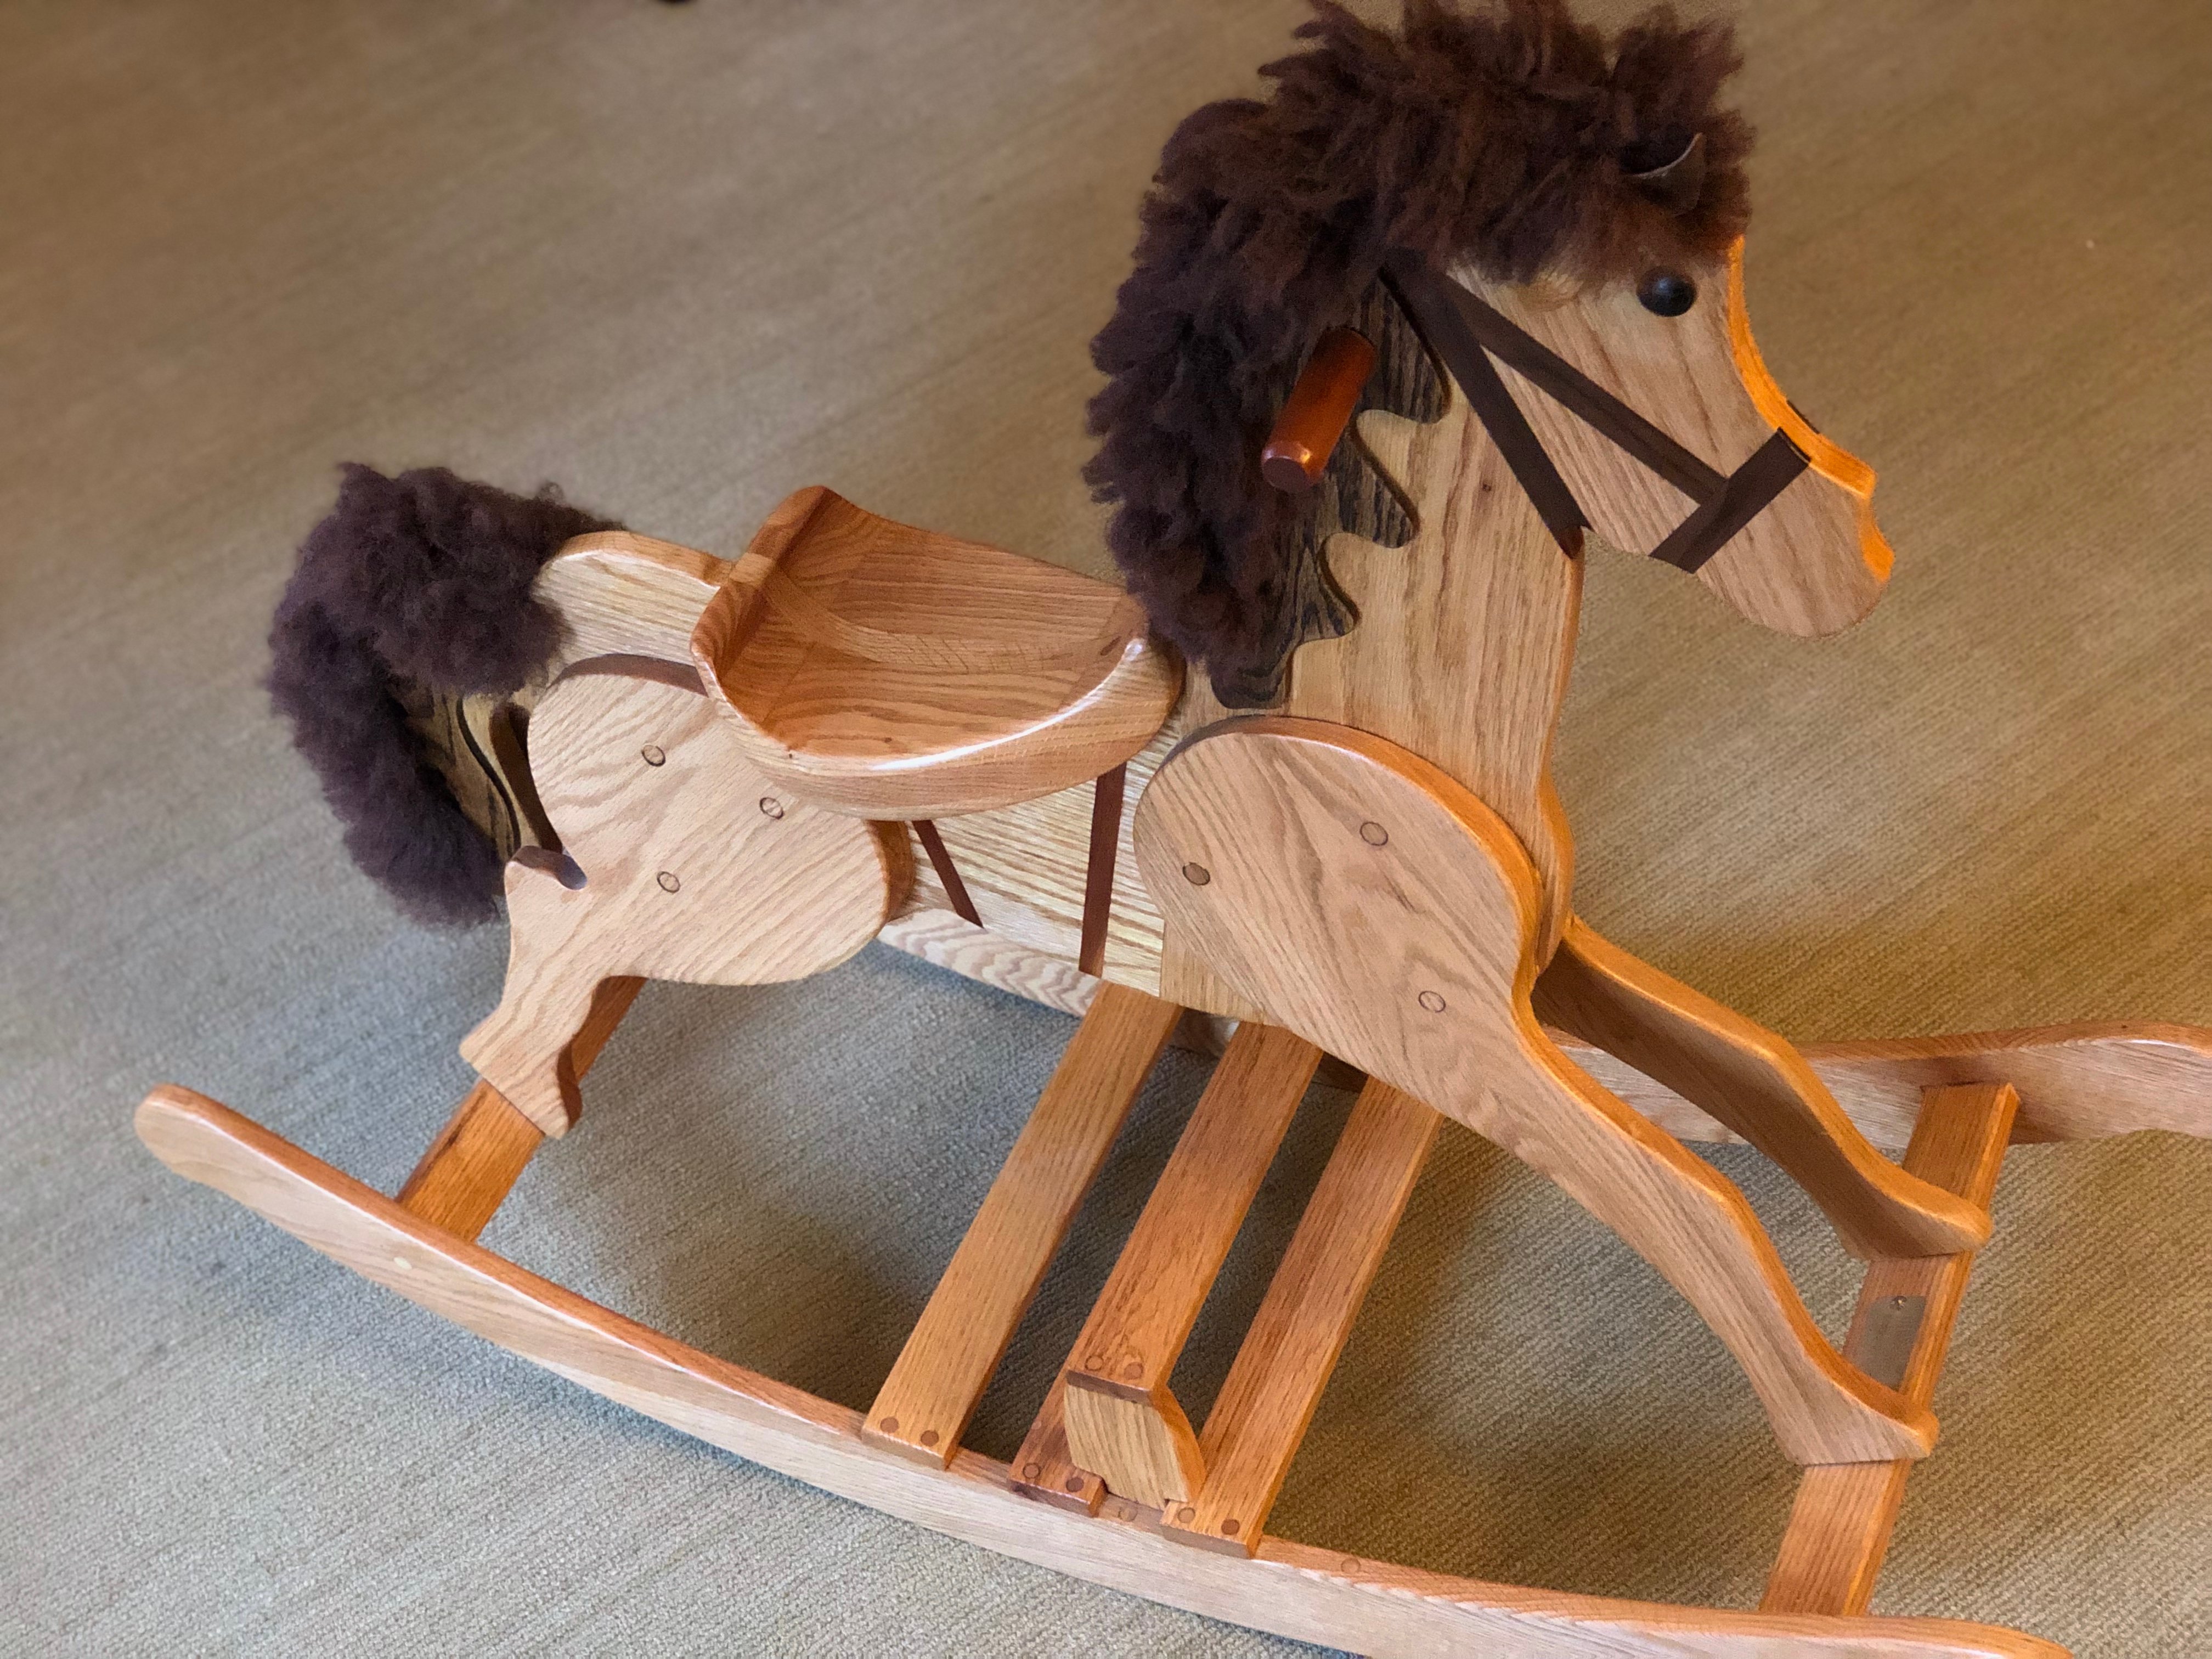 Hobby Horse by Bill Wold